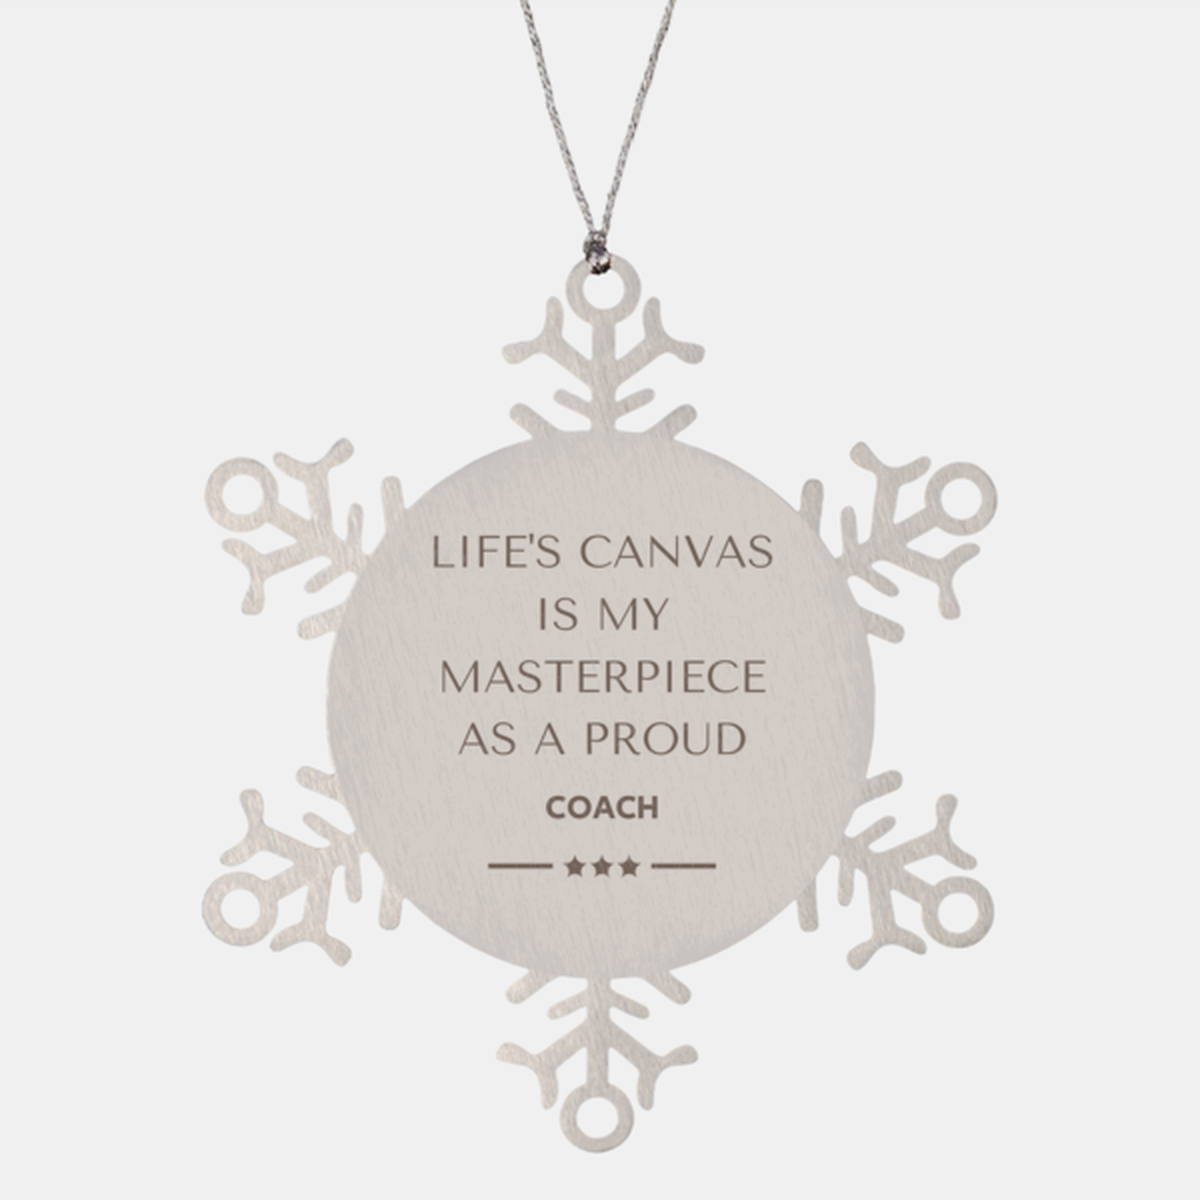 Proud Coach Gifts, Life's canvas is my masterpiece, Epic Birthday Christmas Unique Snowflake Ornament For Coach, Coworkers, Men, Women, Friends